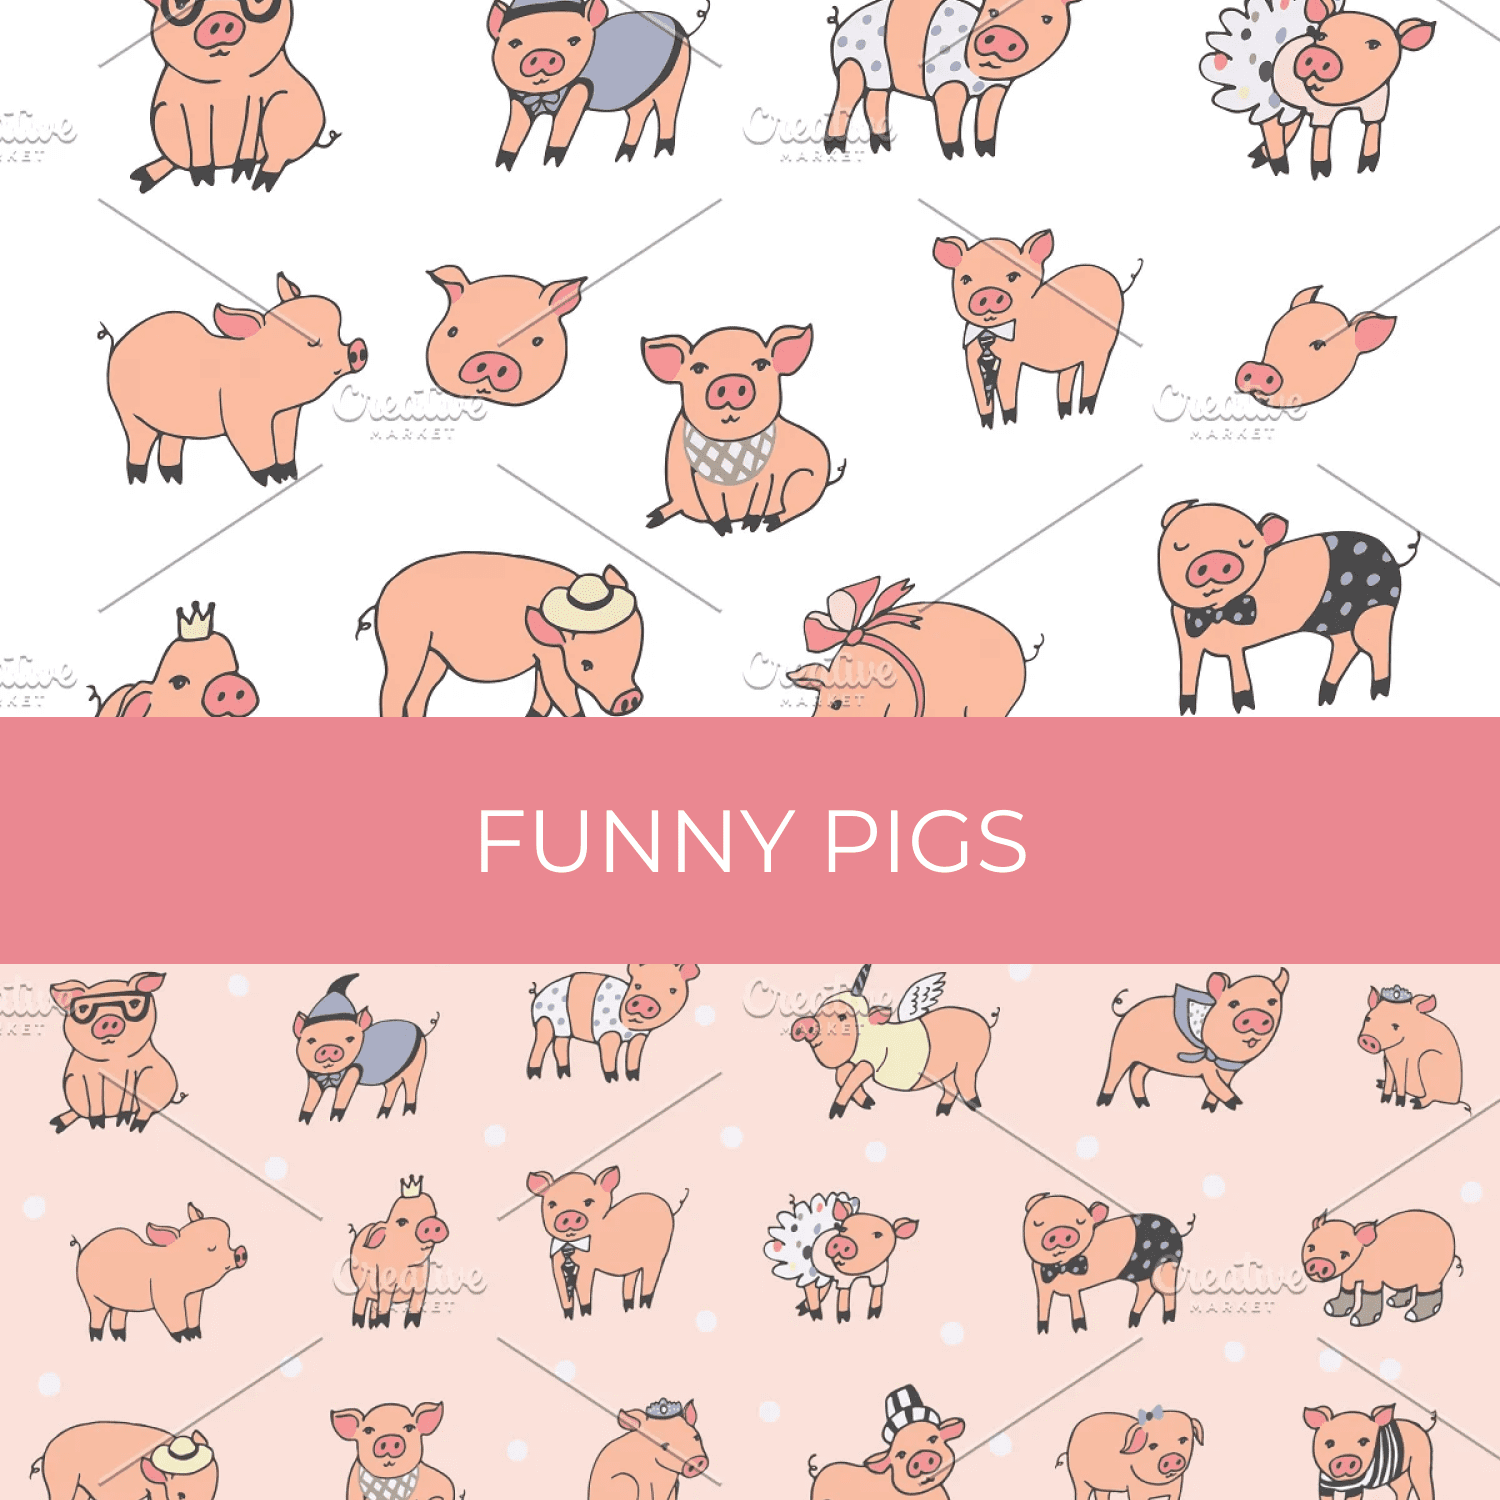 Funny Pigs cover.